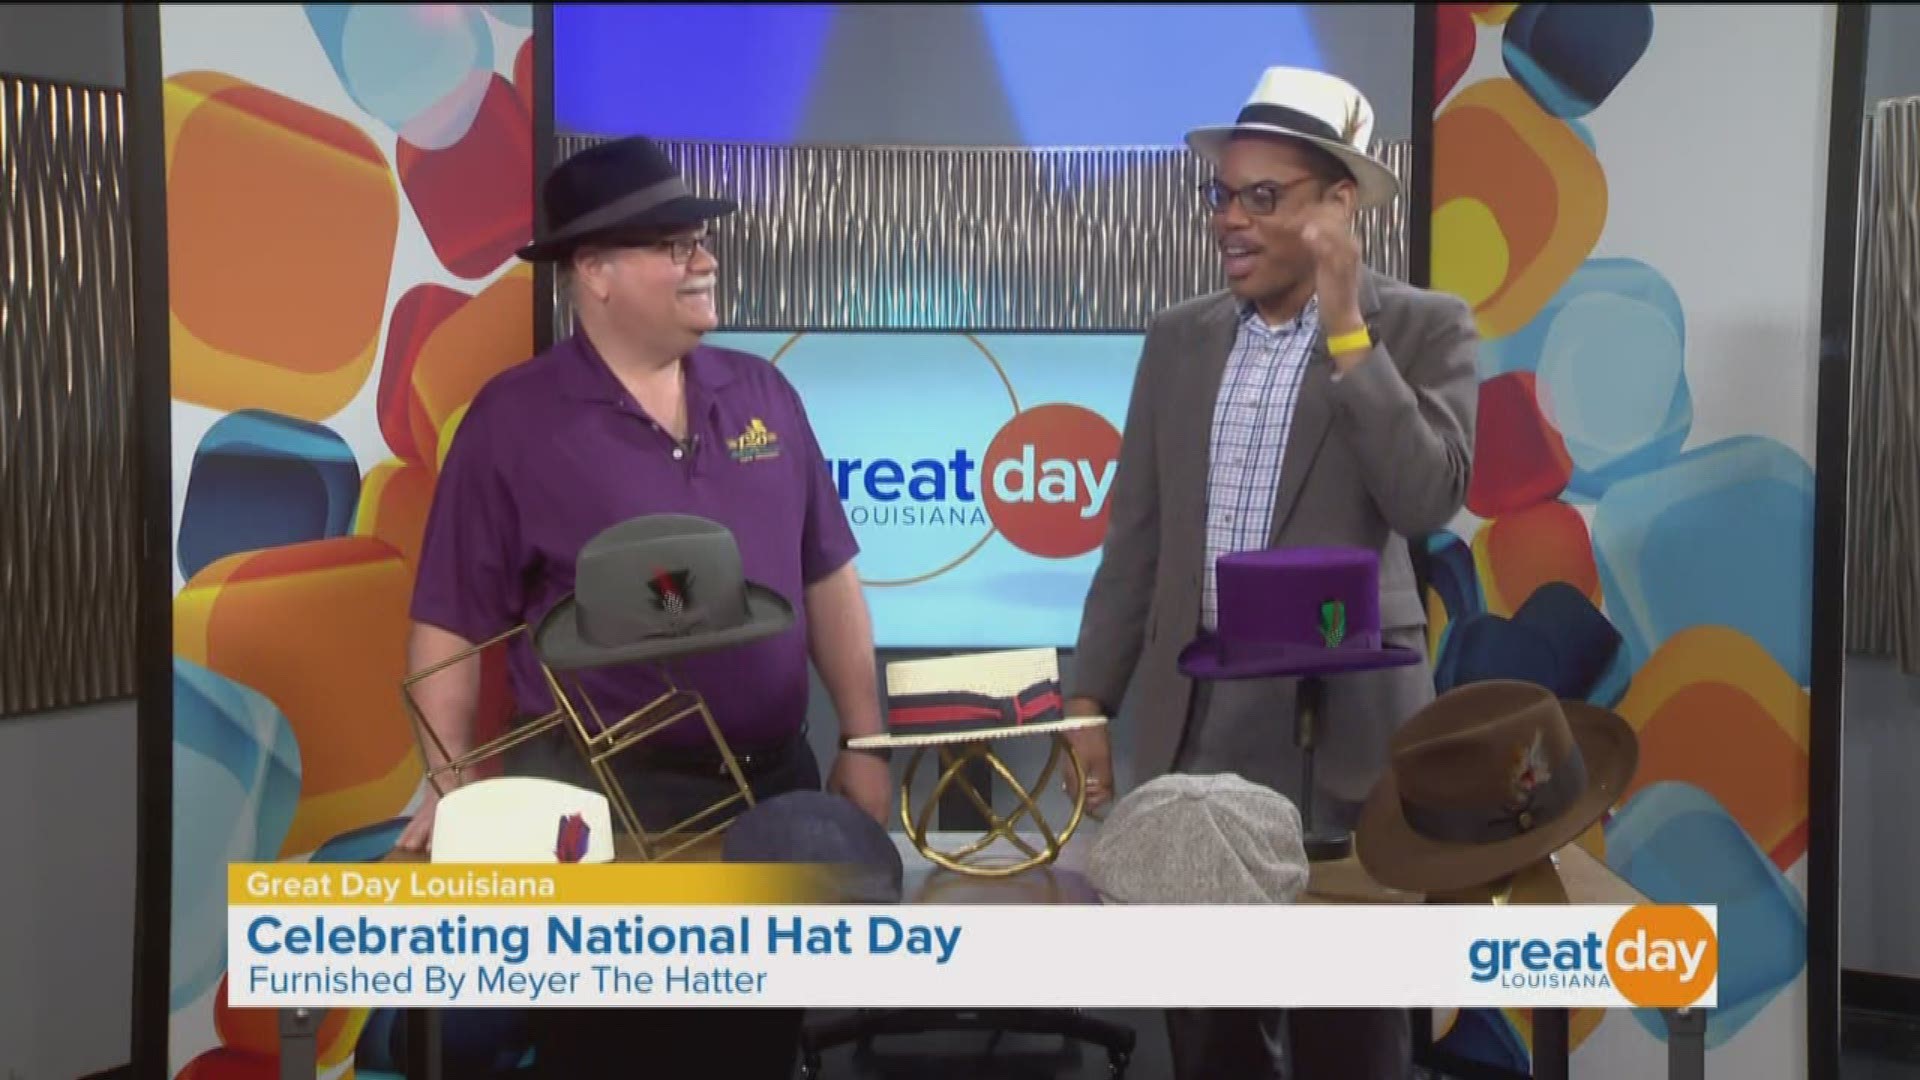 Paul Meyer from "Meyer the Hatter" discussed different hat options in honor of "National Hat Day."